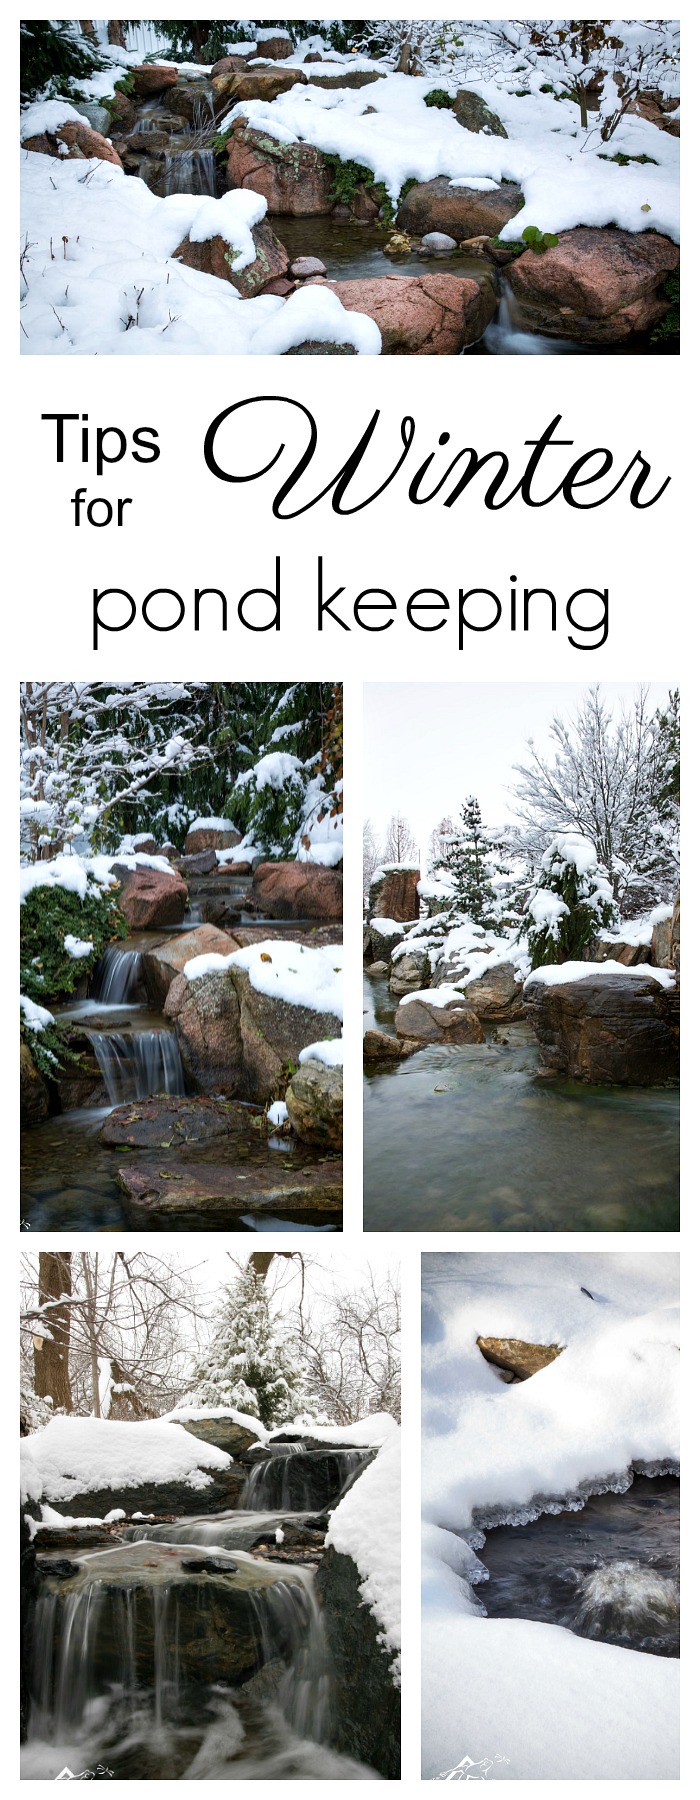 How to Maintain a Pond During the Winter Season